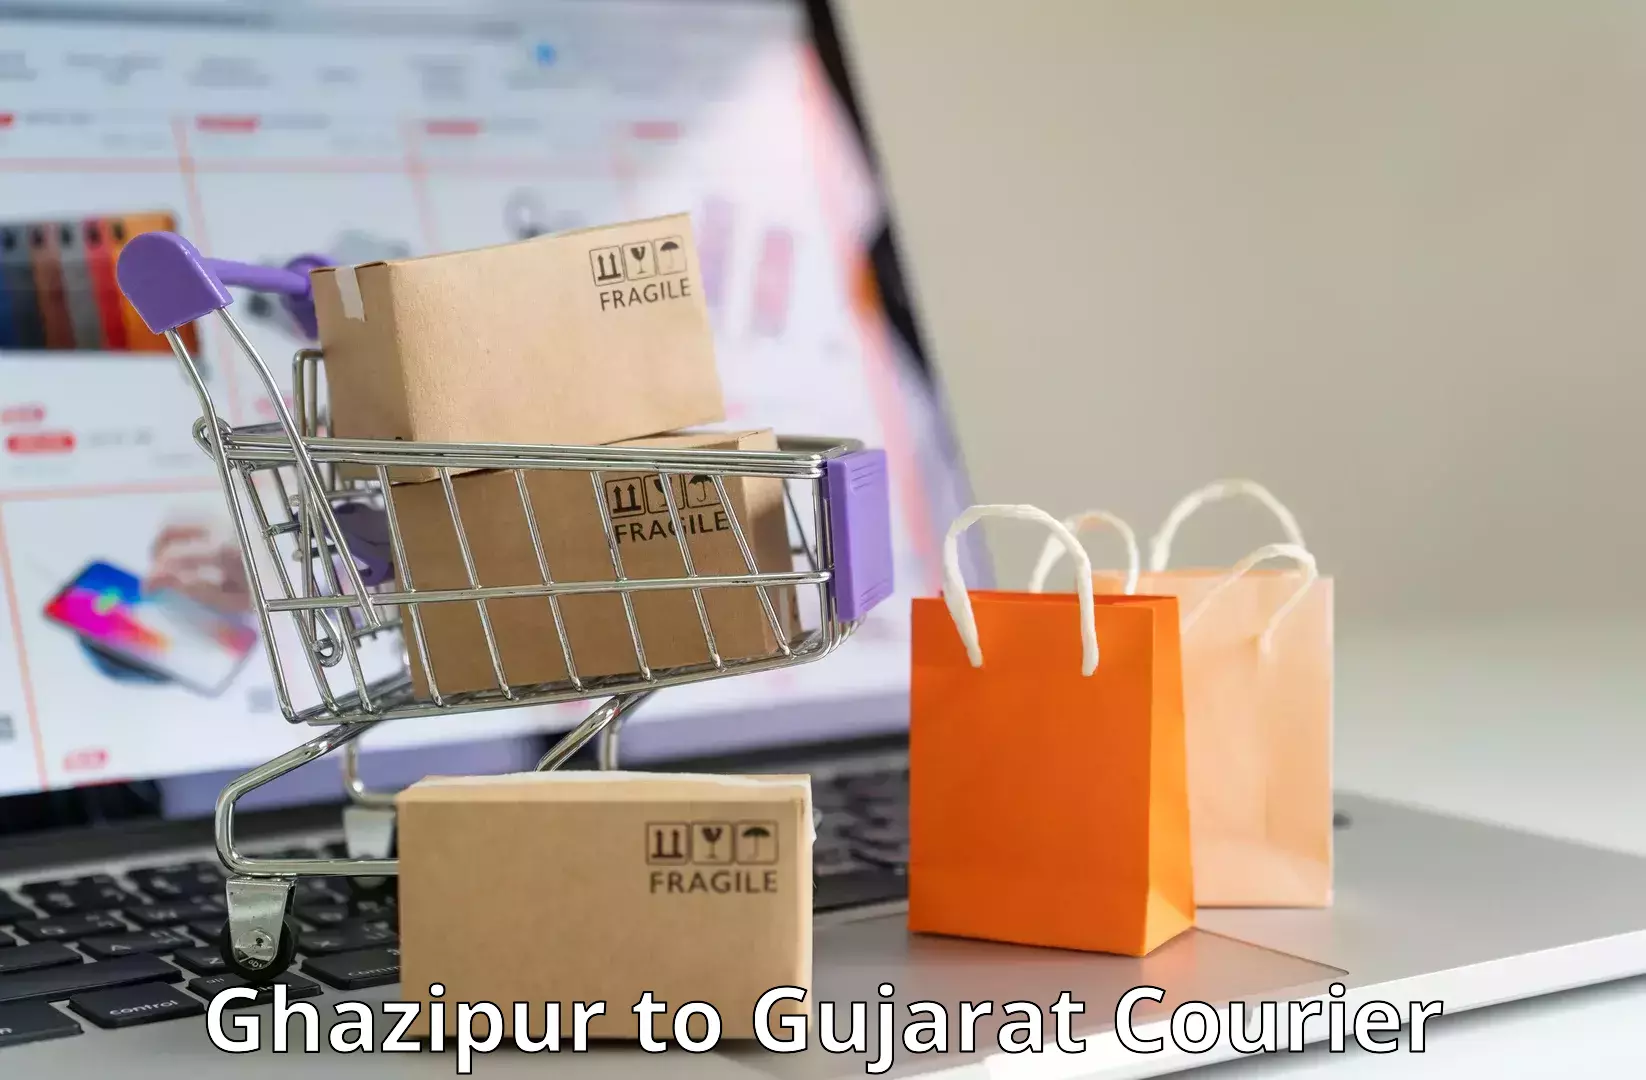 Online package tracking Ghazipur to Ahmedabad